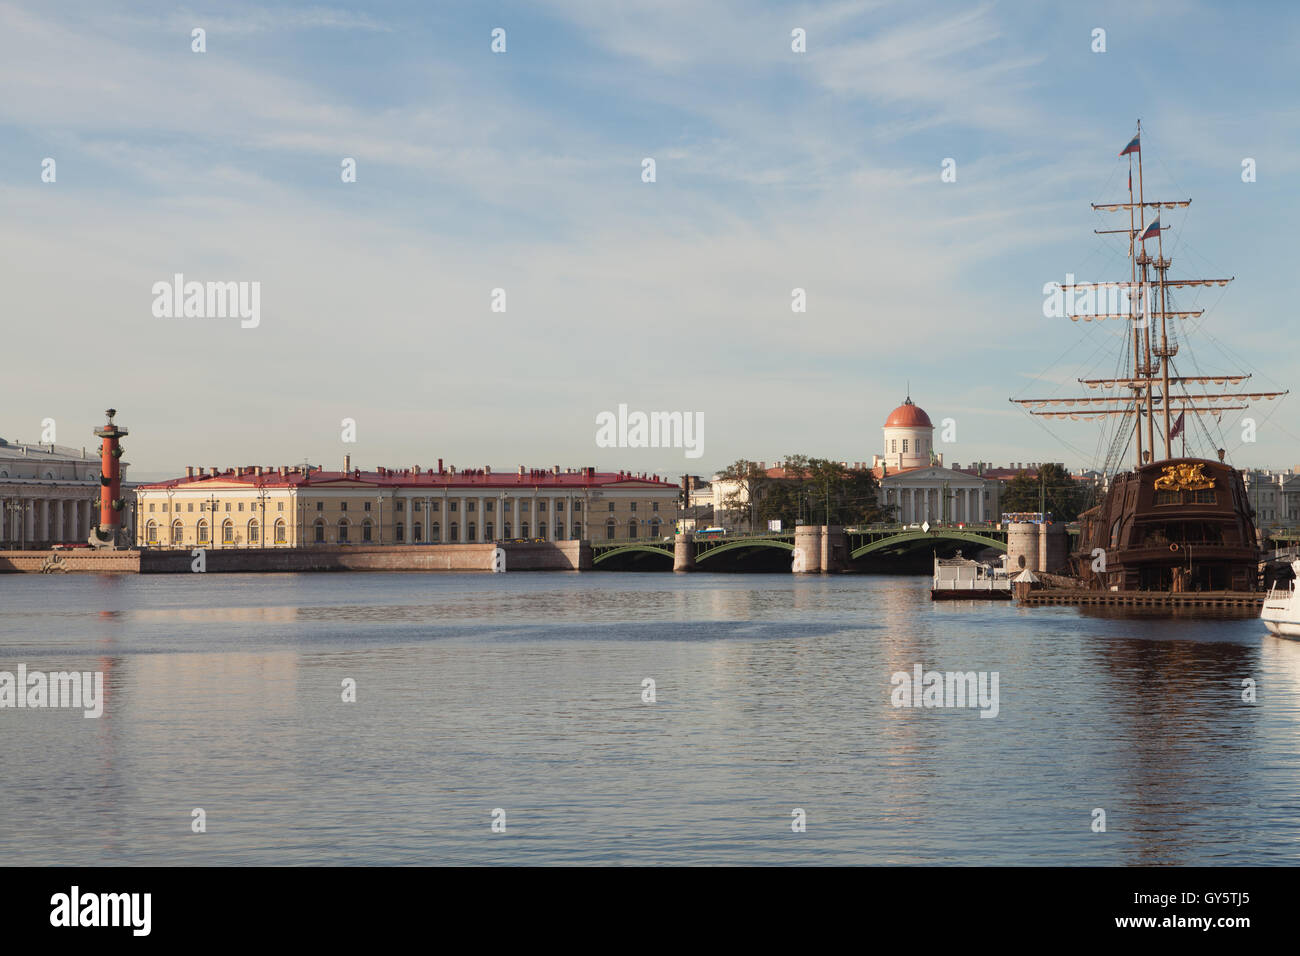 Morning in St. Petersburg, Russia. Stock Photo